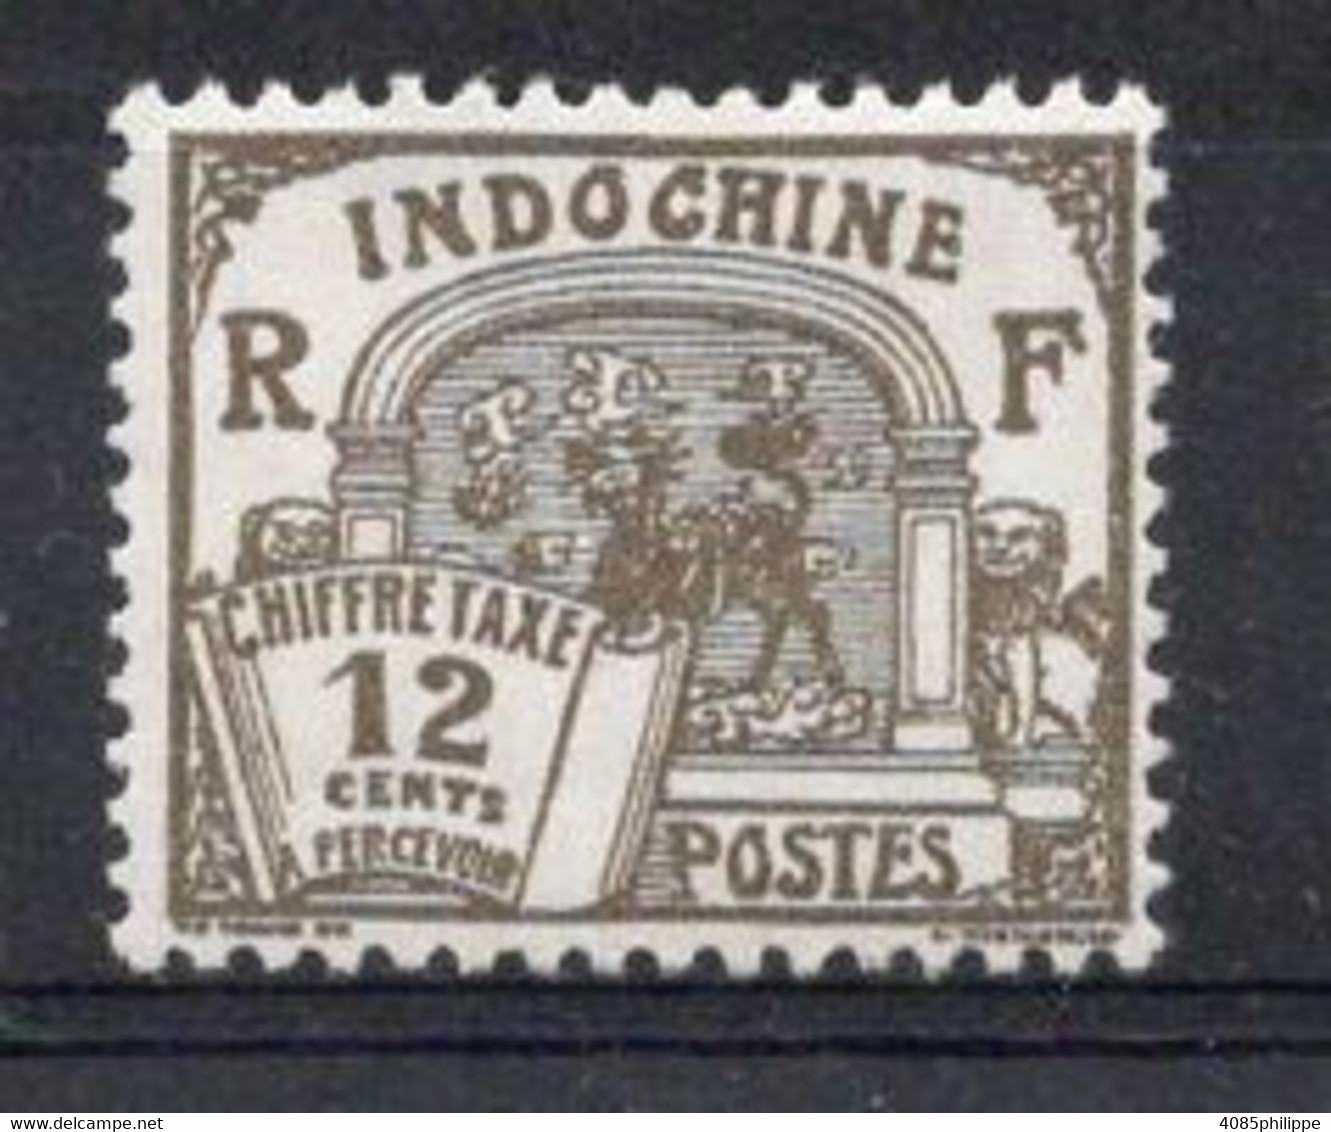 INDOCHINE Timbre Taxe N°53* Neuf Gomme Tachée Cote 7€00 - Portomarken